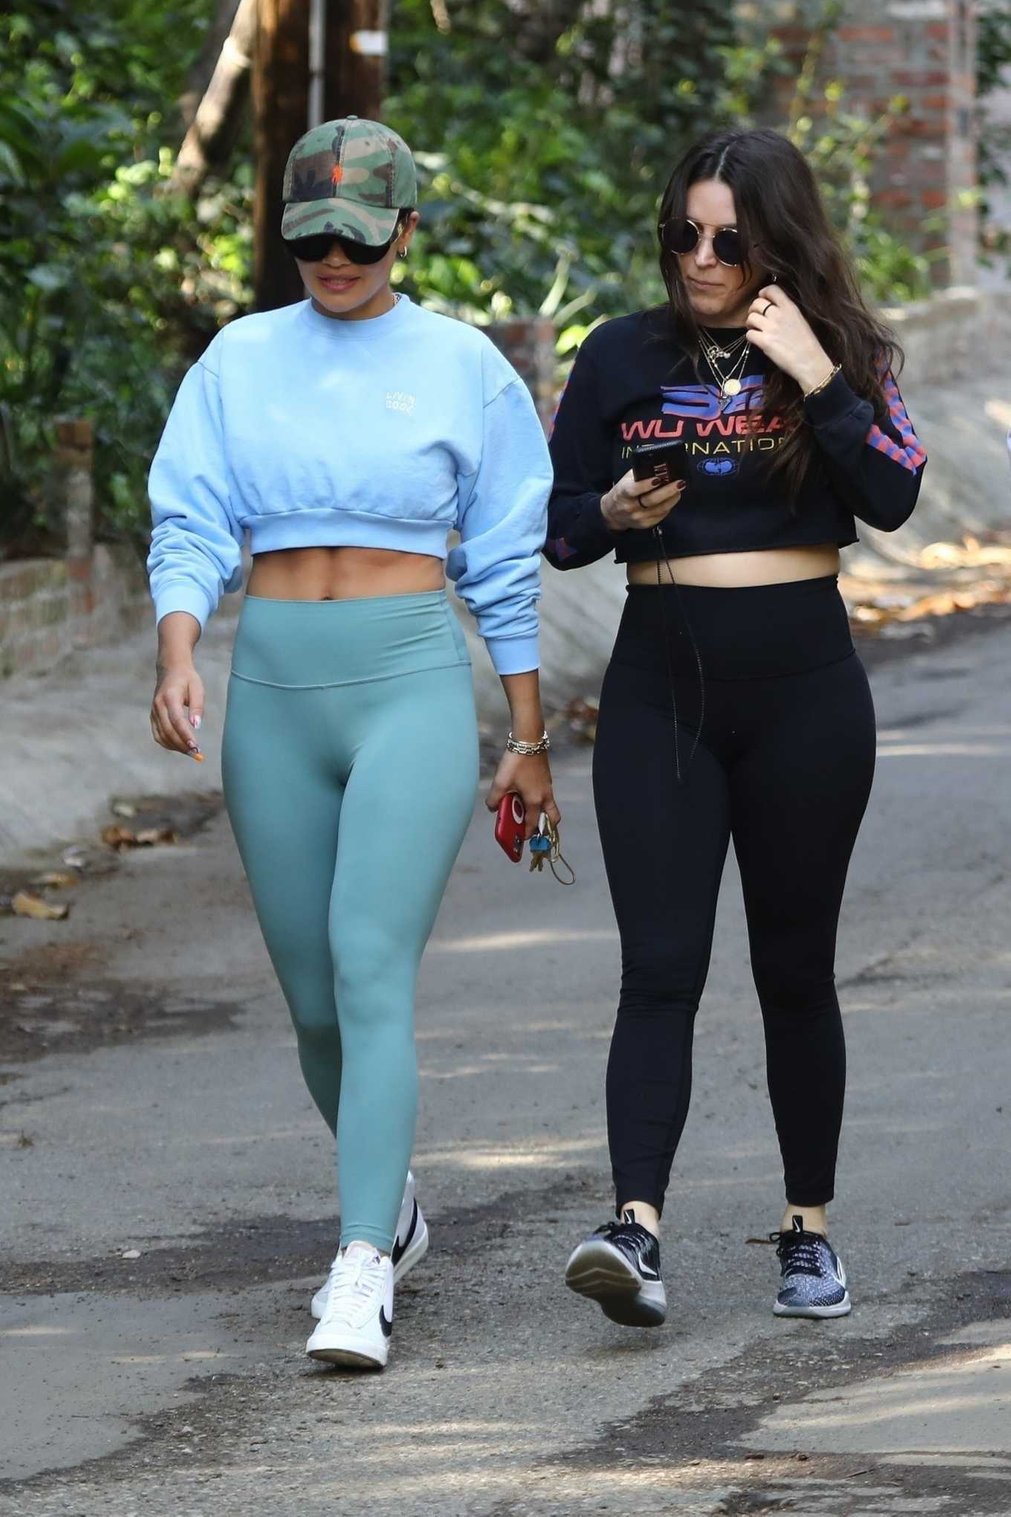 Rita Ora 2020 : Rita Ora – goes for a hike with friends in Los Angeles-02